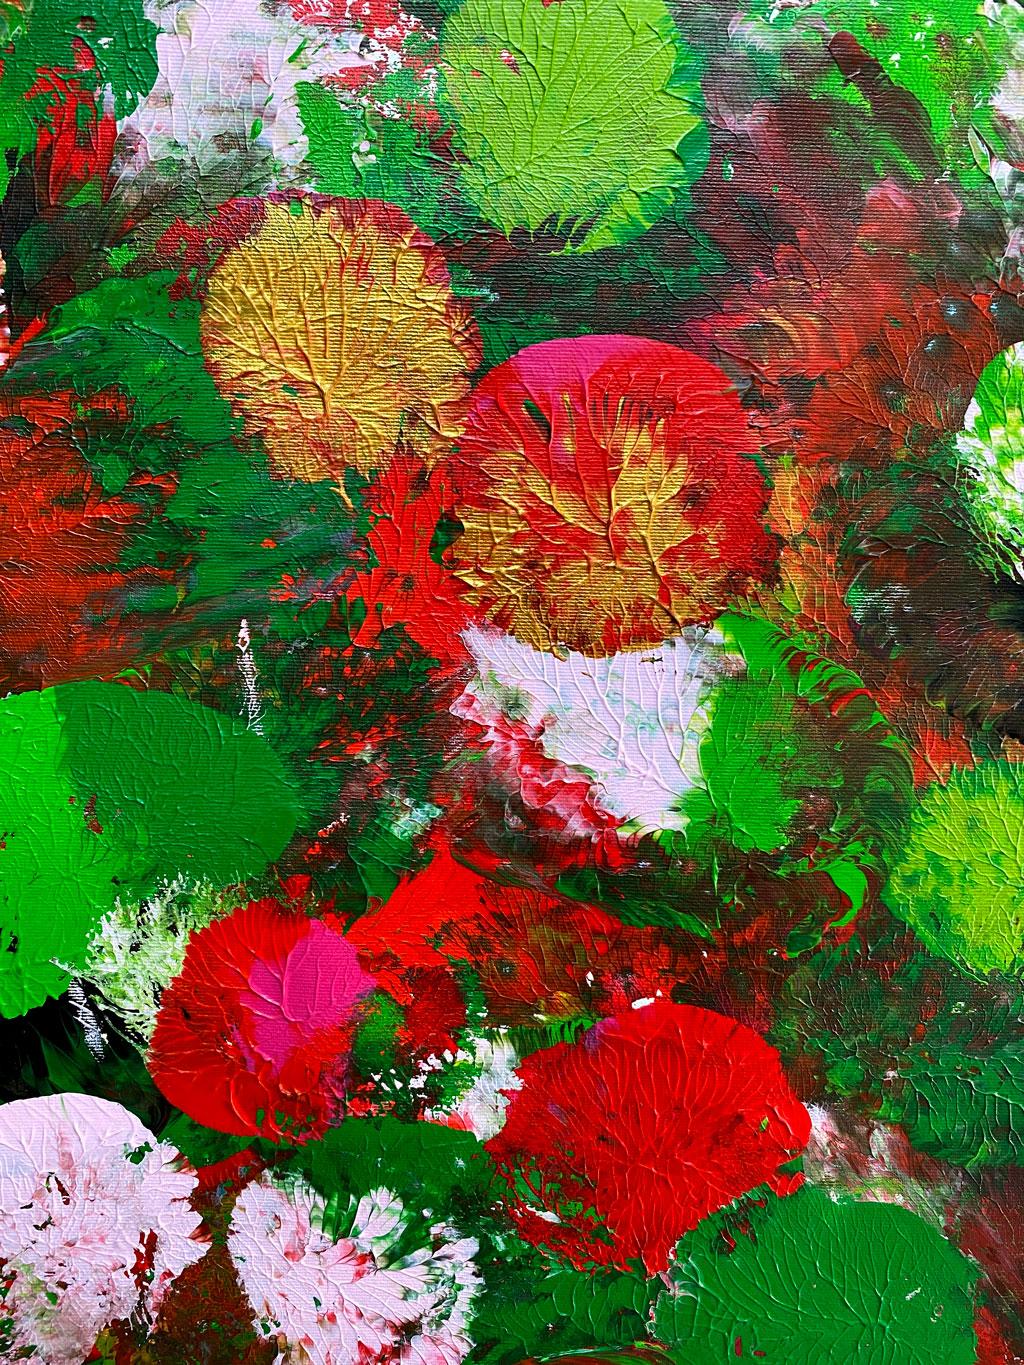 Wildflower Nº 18 Luigi Rodríguez canvas boxing colors flowers red pink green  - Painting by Luigi Rodriguez